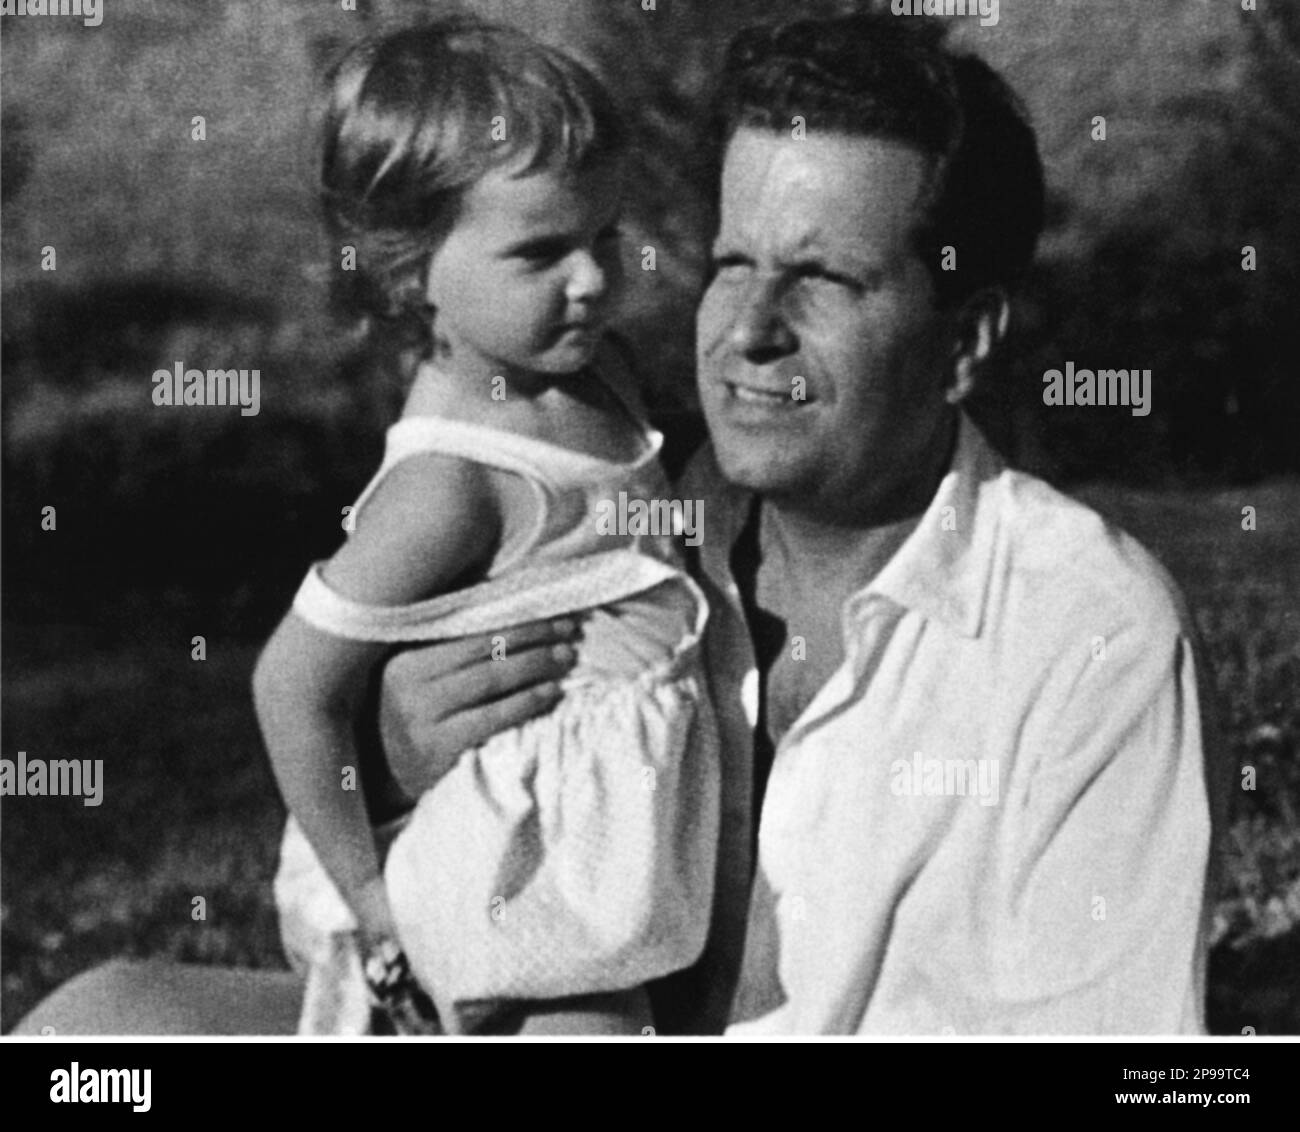 1950 ca  : FILIBERTO TOSELLI with daughter MONICA . Son of the scandalous Kronprinzessin zu Sachsen  LUISA VON TOSCANA ( Luise von Sachsen , Louise von Osterreich - Toskana  , Countess of Montignoso ,  1870 – 1947 ). Princess Imperial and Archduchess of Austria, Princess of Tuscany, Hungary and Bohemia was a daughter of Ferdinand IV of Tuscany .  On 25 September 1907 Luise married the Italian musician Enrico Toselli in London. They had one son Carlo Emanuele Toselli (1908 - 1969 ) and were divorced five years later and the son legally was to Toselli grand-parents in Florence . - GERMANIA - GER Stock Photo